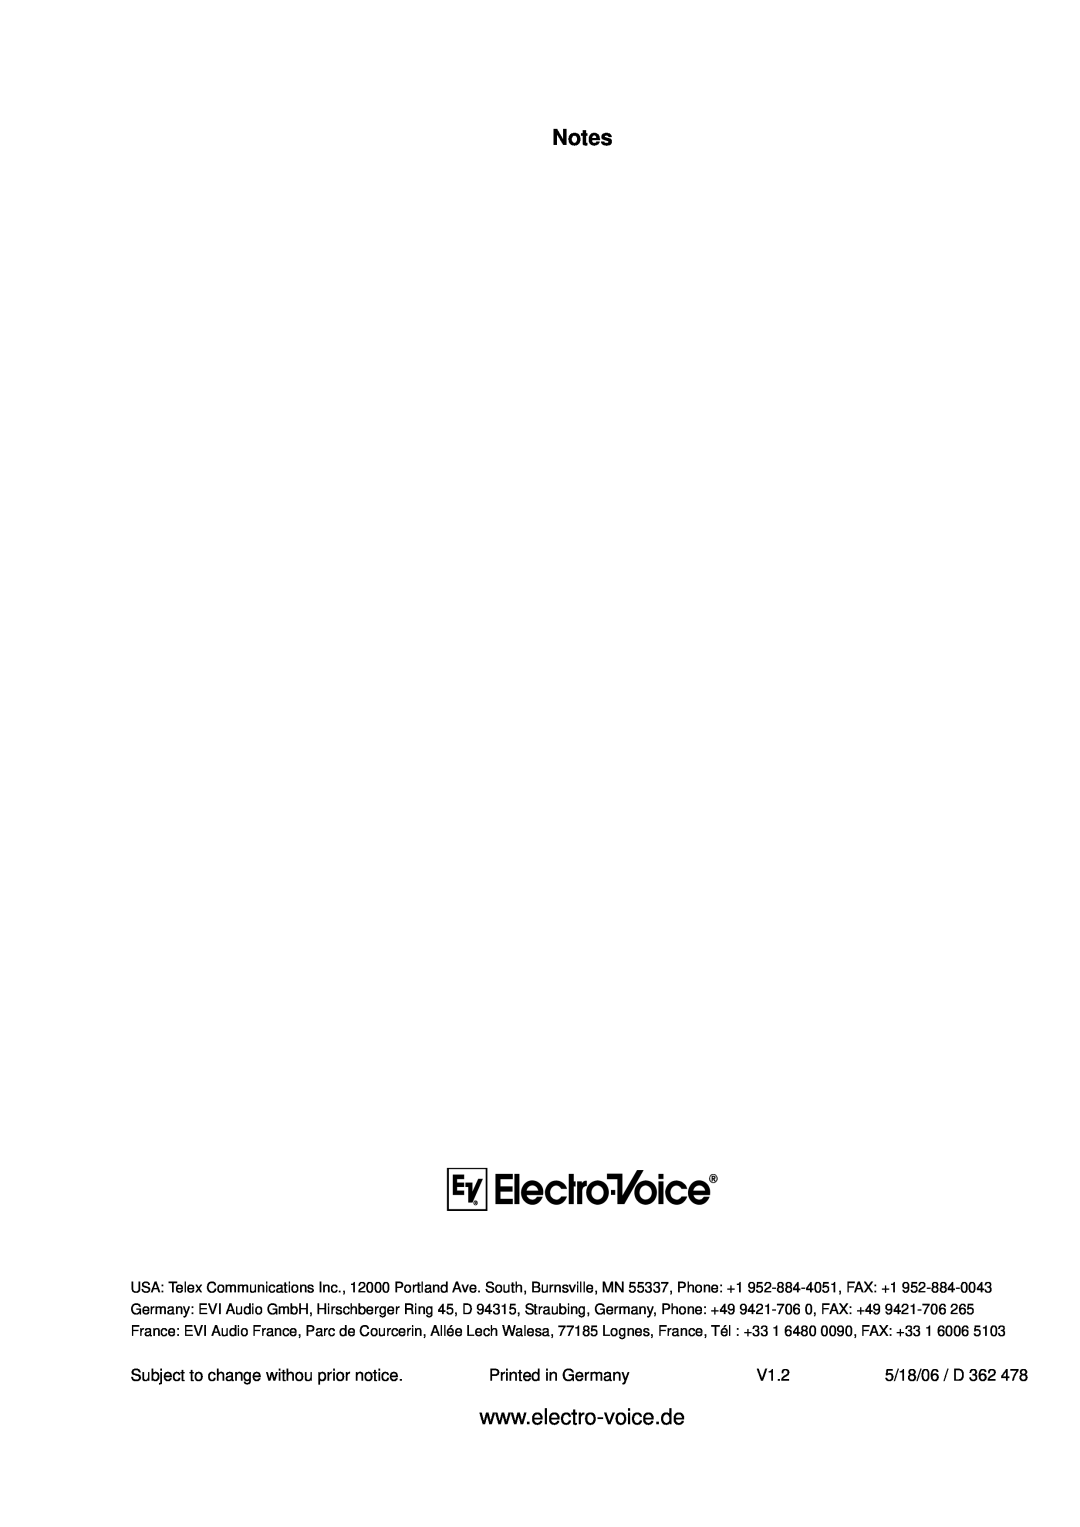 Electro-Voice NetMax N8000 owner manual Subject to change withou prior notice, V1.2 